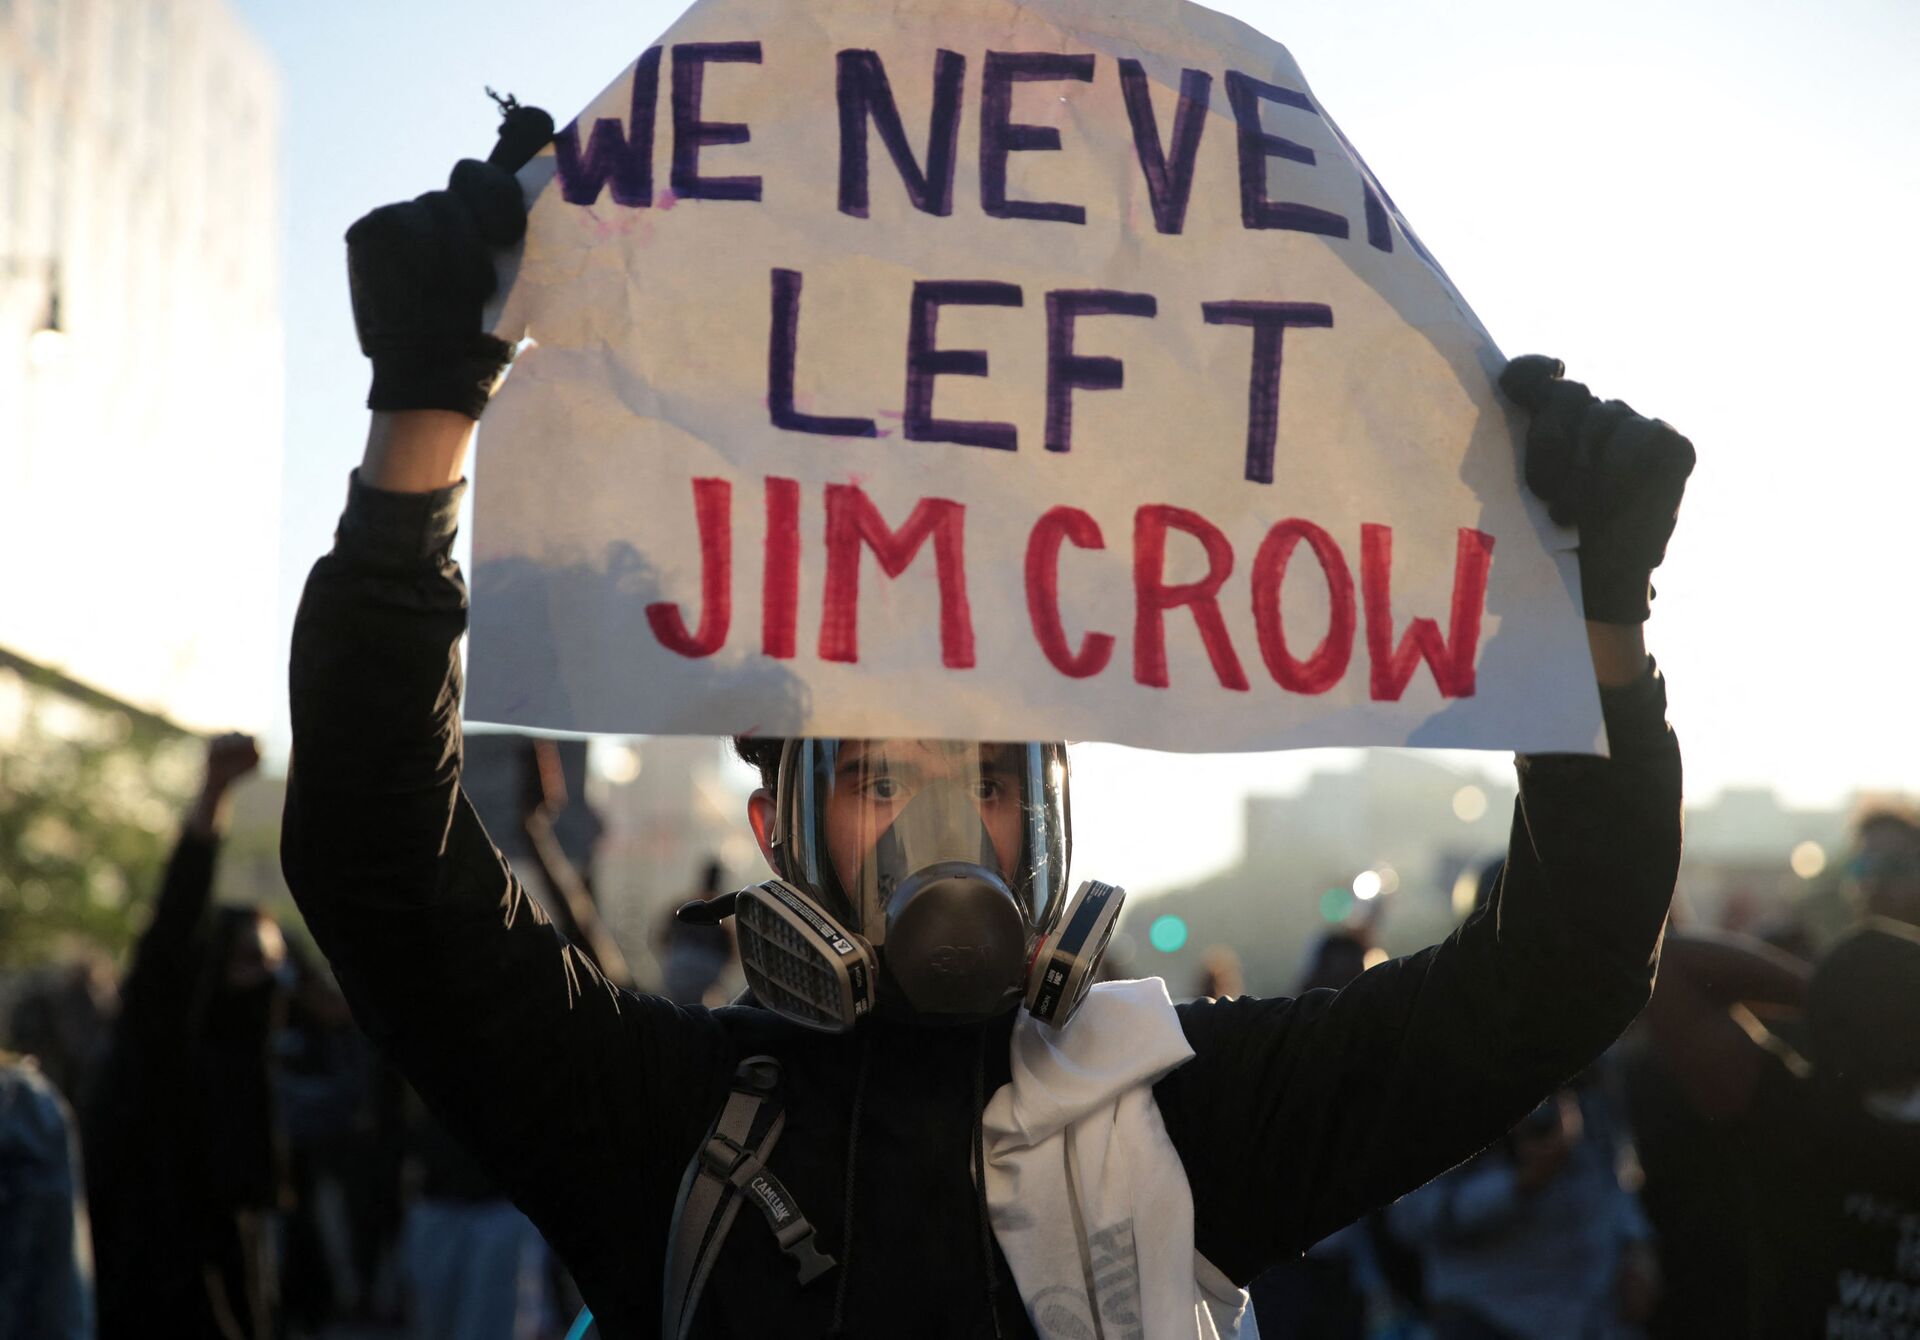 A protester holds up a sign that reads We Never Left Jim Crow during a protest sparked by the death of George Floyd while in police custody on May 29, 2020 in Minneapolis, Minnesota. Earlier today, former Minneapolis police officer Derek Chauvin was taken into custody for Floyd's death. Chauvin has been accused of kneeling on Floyd's neck as he pleaded with him about not being able to breathe. Floyd was pronounced dead a short while later. Chauvin and 3 other officers, who were involved in the arrest, were fired from the police department after a video of the arrest was circulated. - Sputnik International, 1920, 07.09.2021